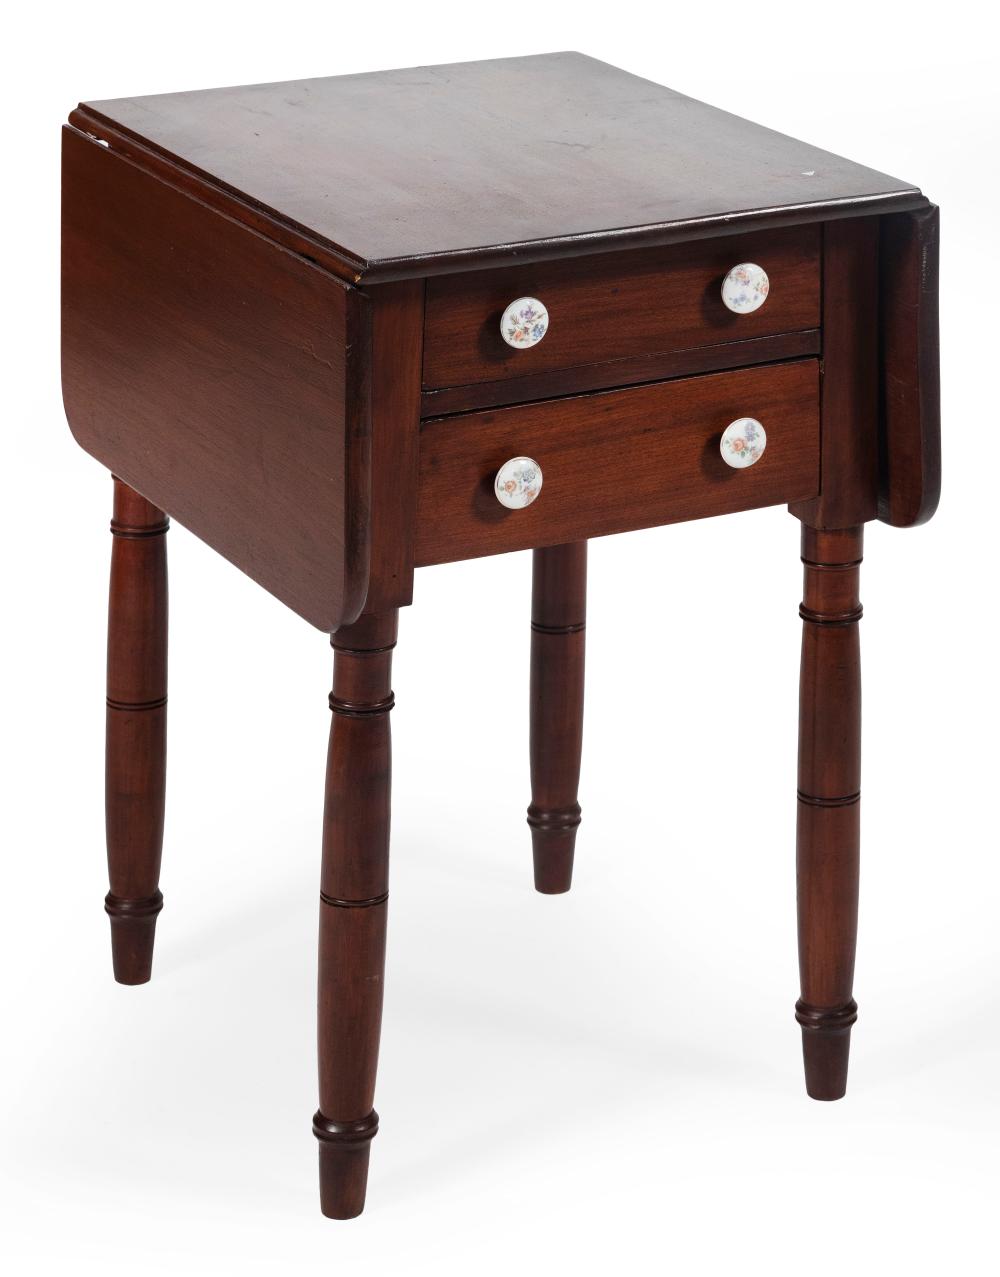 TWO-DRAWER DROP-LEAF STAND 19TH